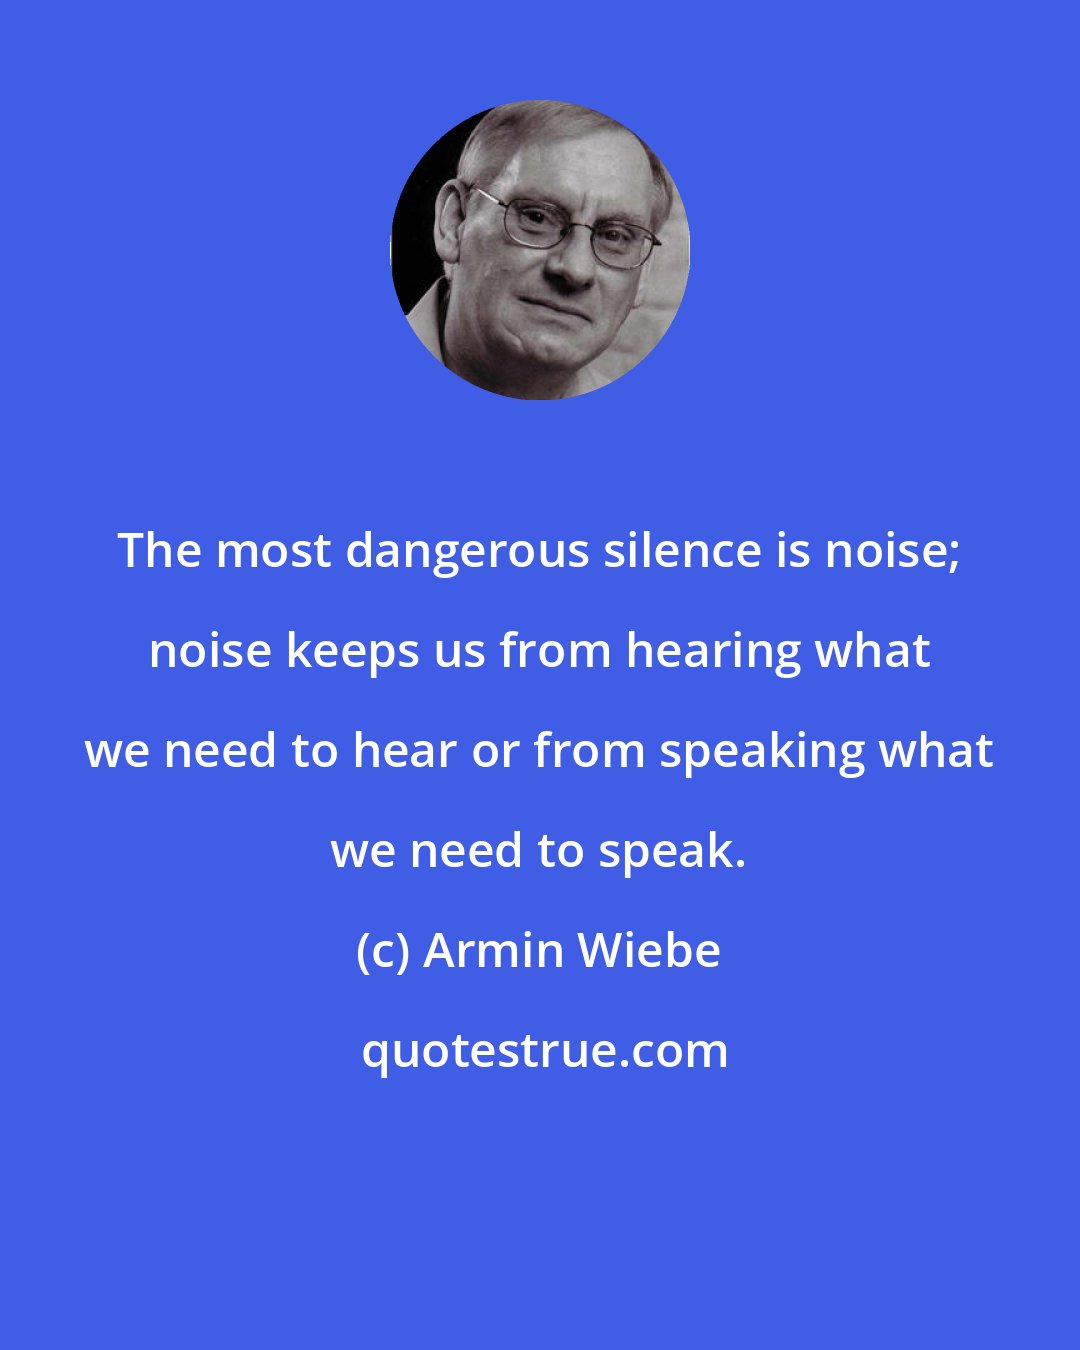 Armin Wiebe: The most dangerous silence is noise; noise keeps us from hearing what we need to hear or from speaking what we need to speak.